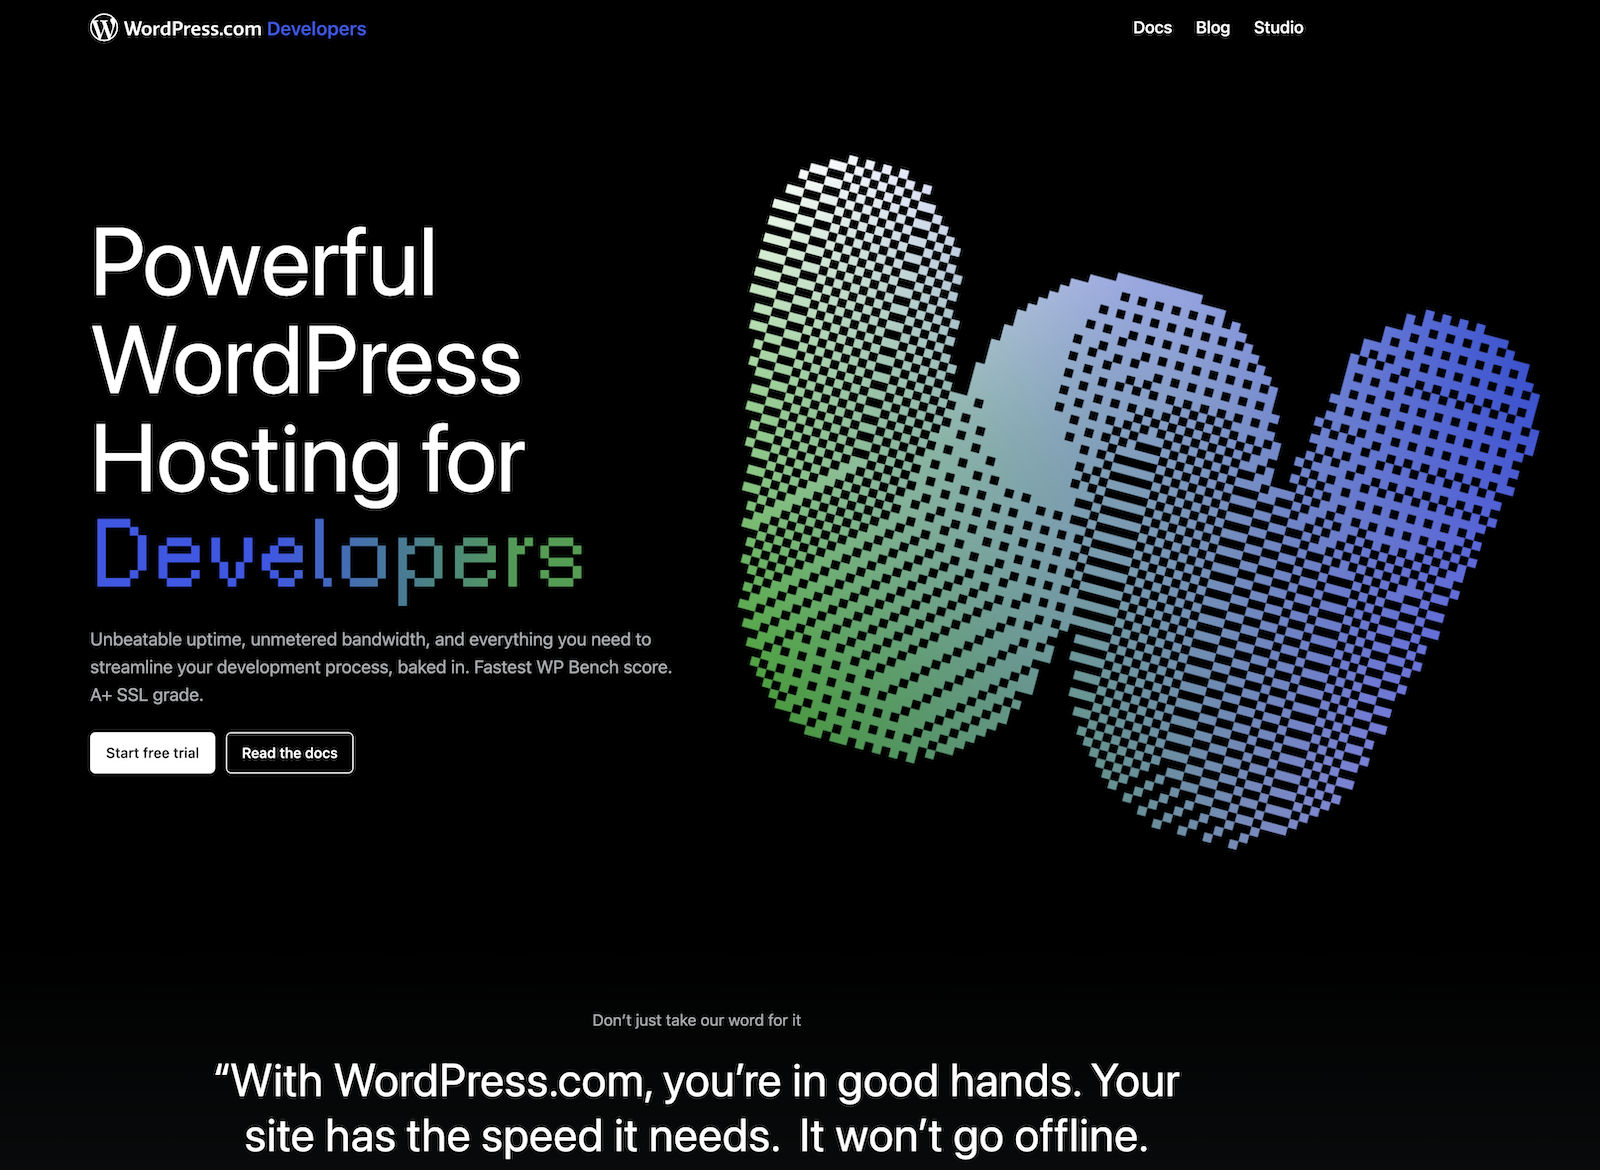 The new developer.wordpress.com homepage with a black background, a pixelated W logo, and the headline 'Powerful WordPress Hosting for Developers'